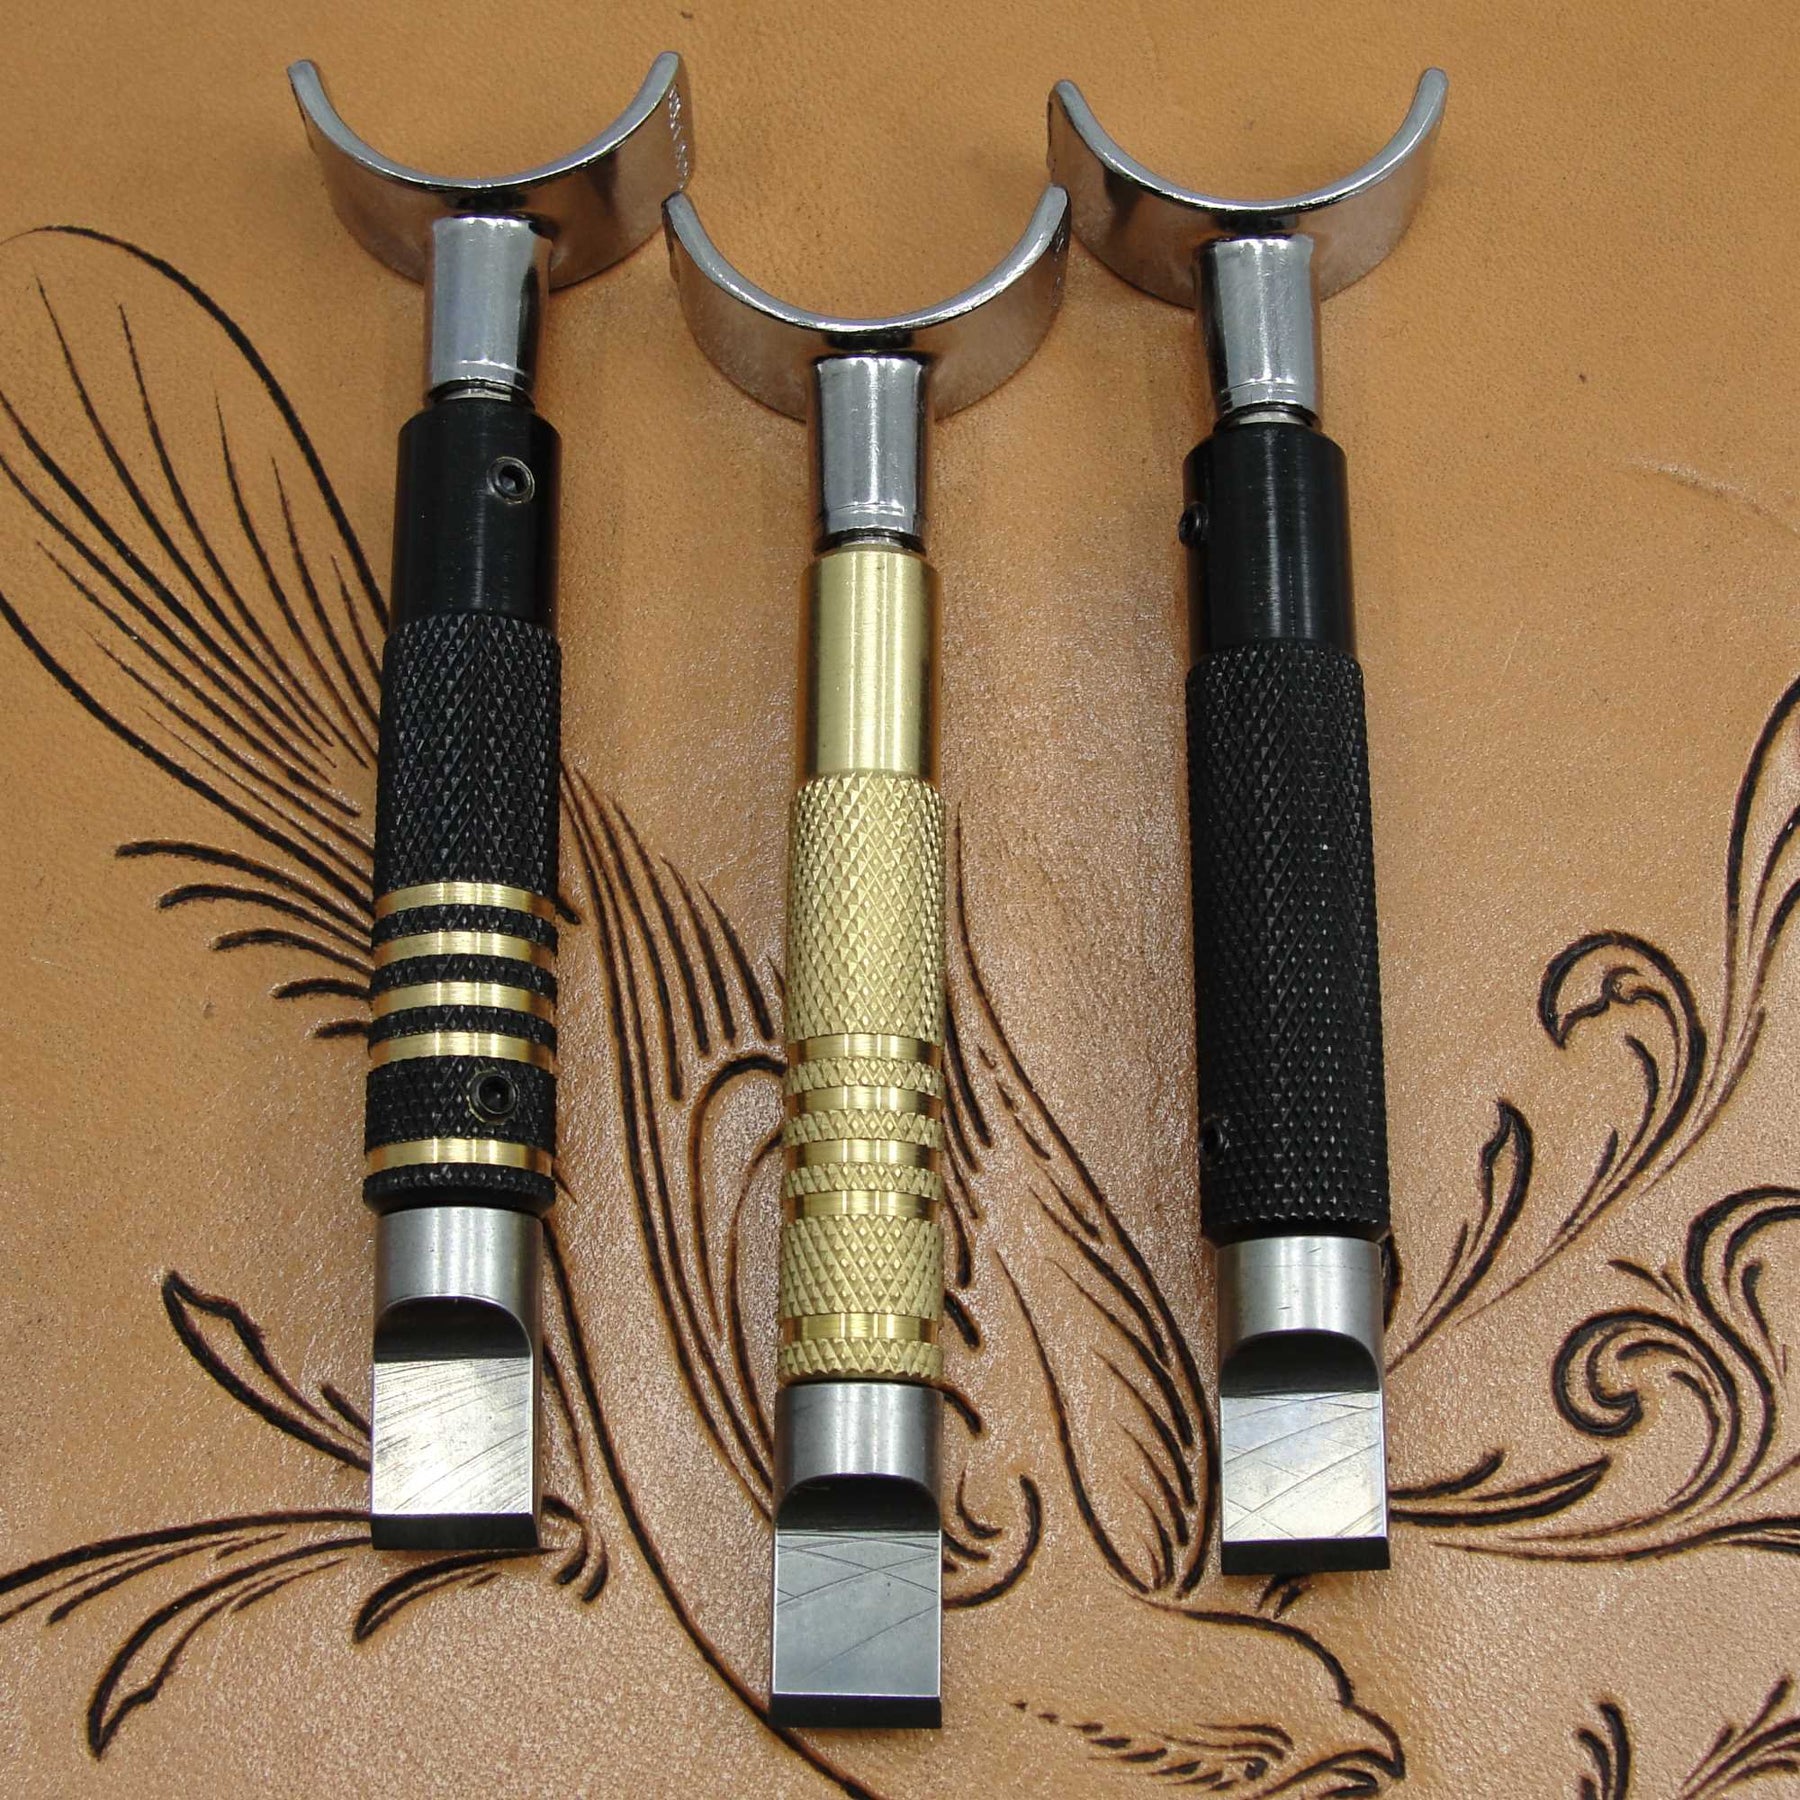 Tebru Ball Bearing Swivel Knife Tungsten Steel Adjustable DIY Hand-Made  Leather Carving Tool,Leather Carving Knife 